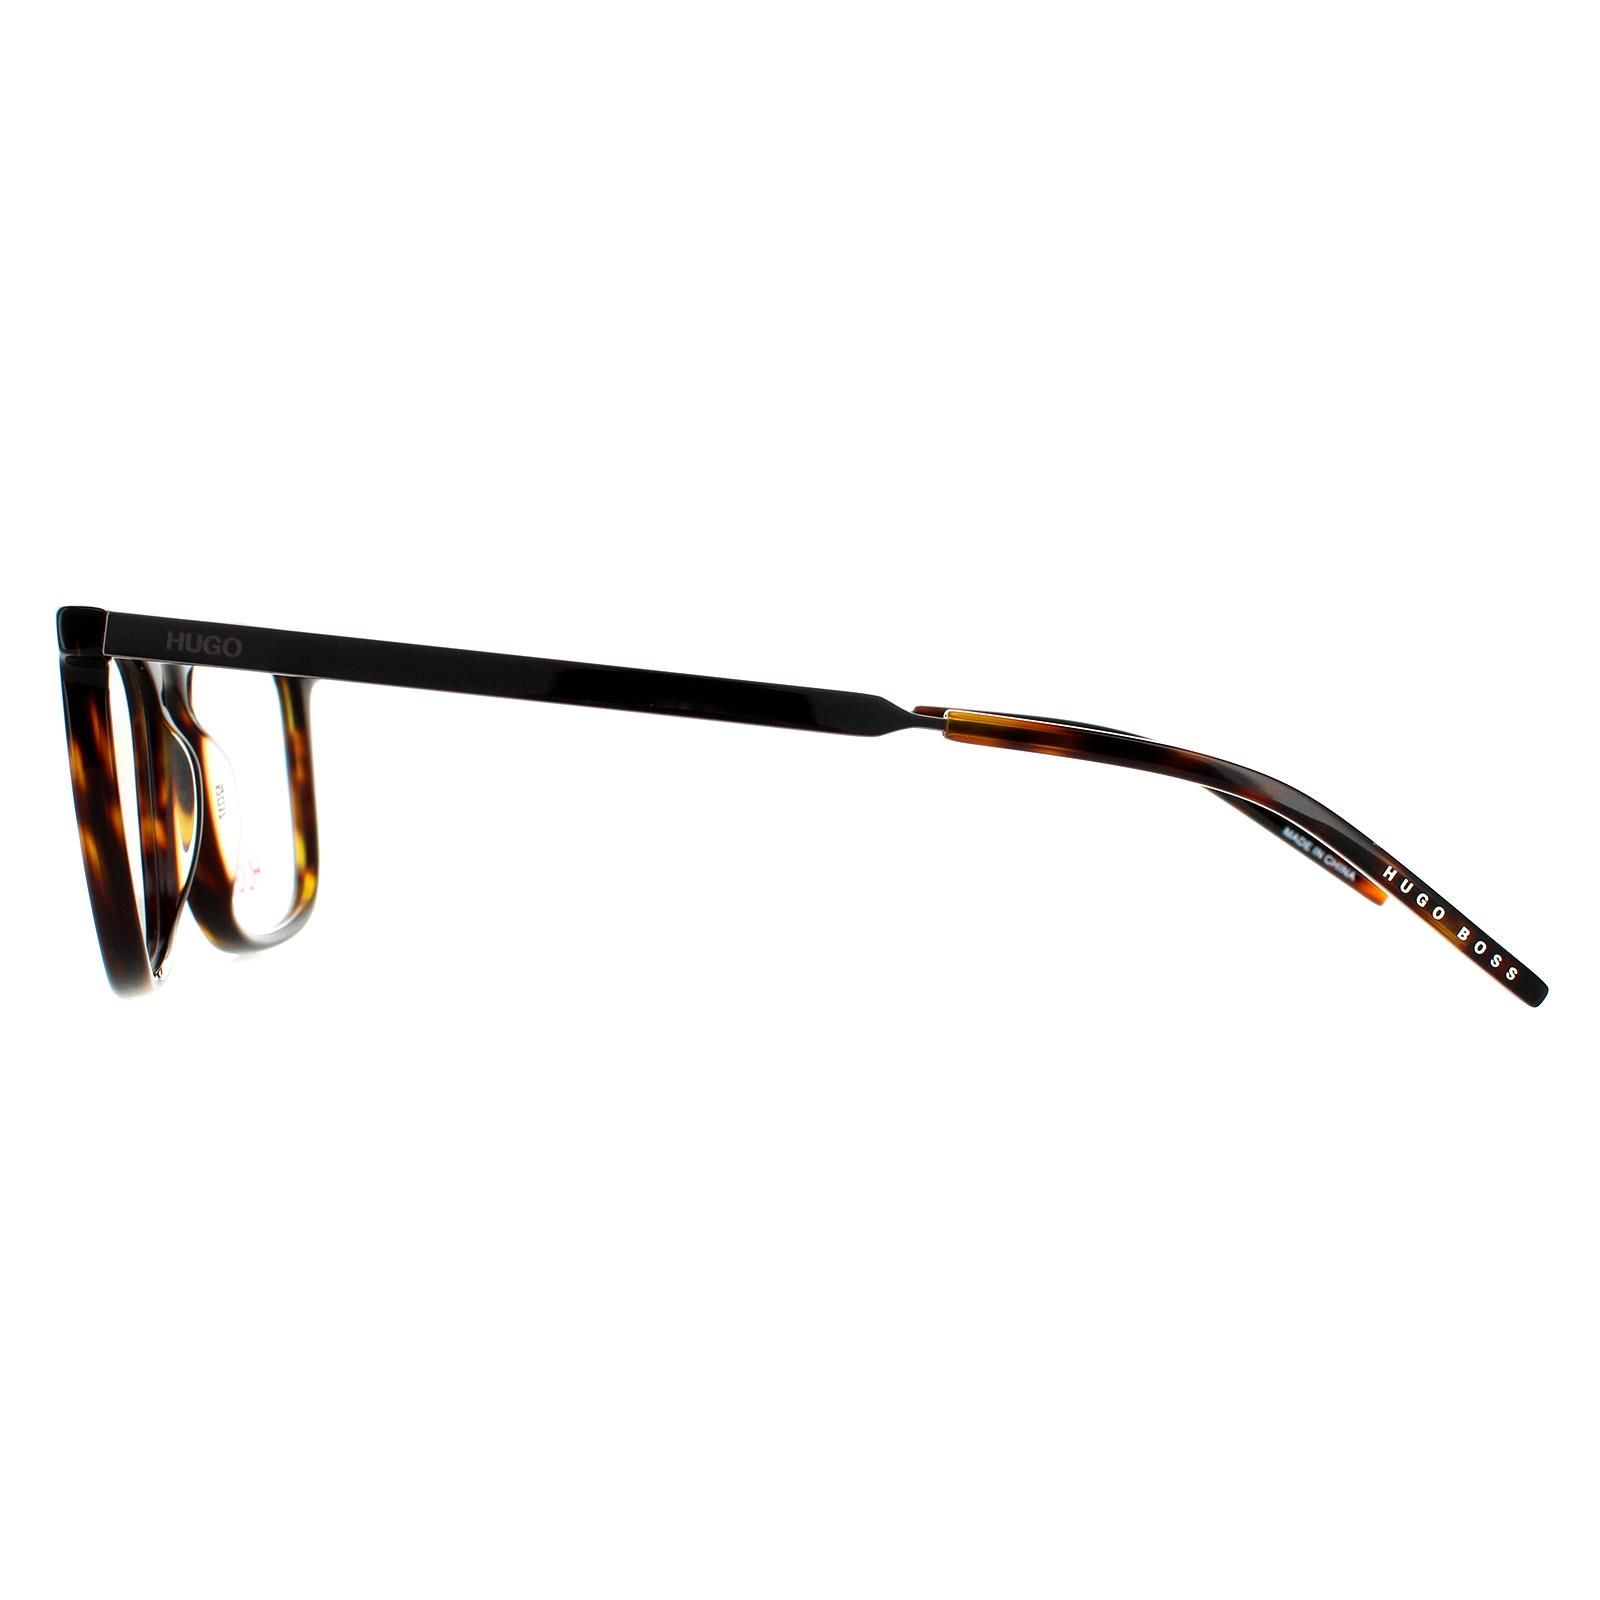 Hugo by Hugo Boss Square Mens Havana Glasses Frames HG 1018 are a simple square style crafted from lightweight acetate. Slim temples are engraved with the Hugo Boss logo for authenticity.